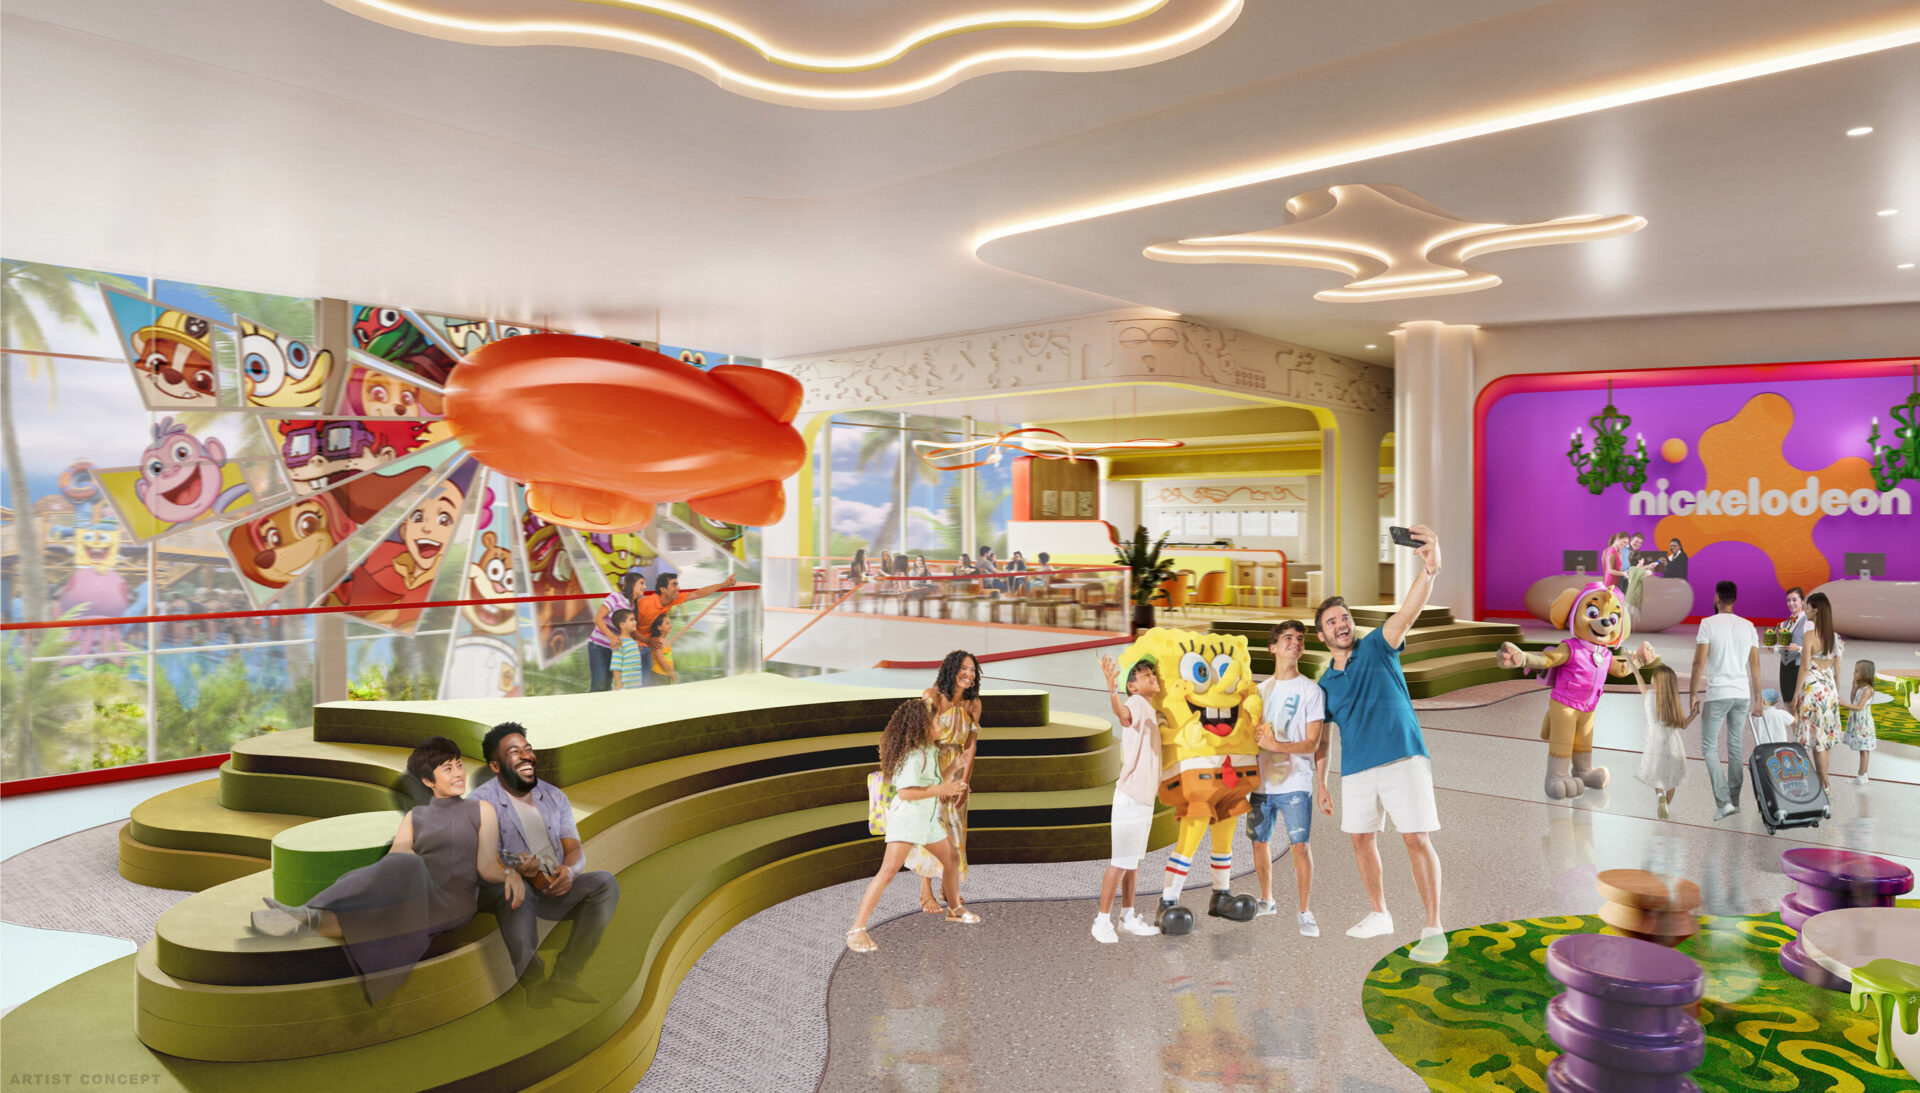 Nickelodeon Hotels & Resorts Orlando, opening in Kissimmee in 2026, promises immersive family fun with themed rooms, beloved characters, and luxury amenities in Florida's sunny heart.